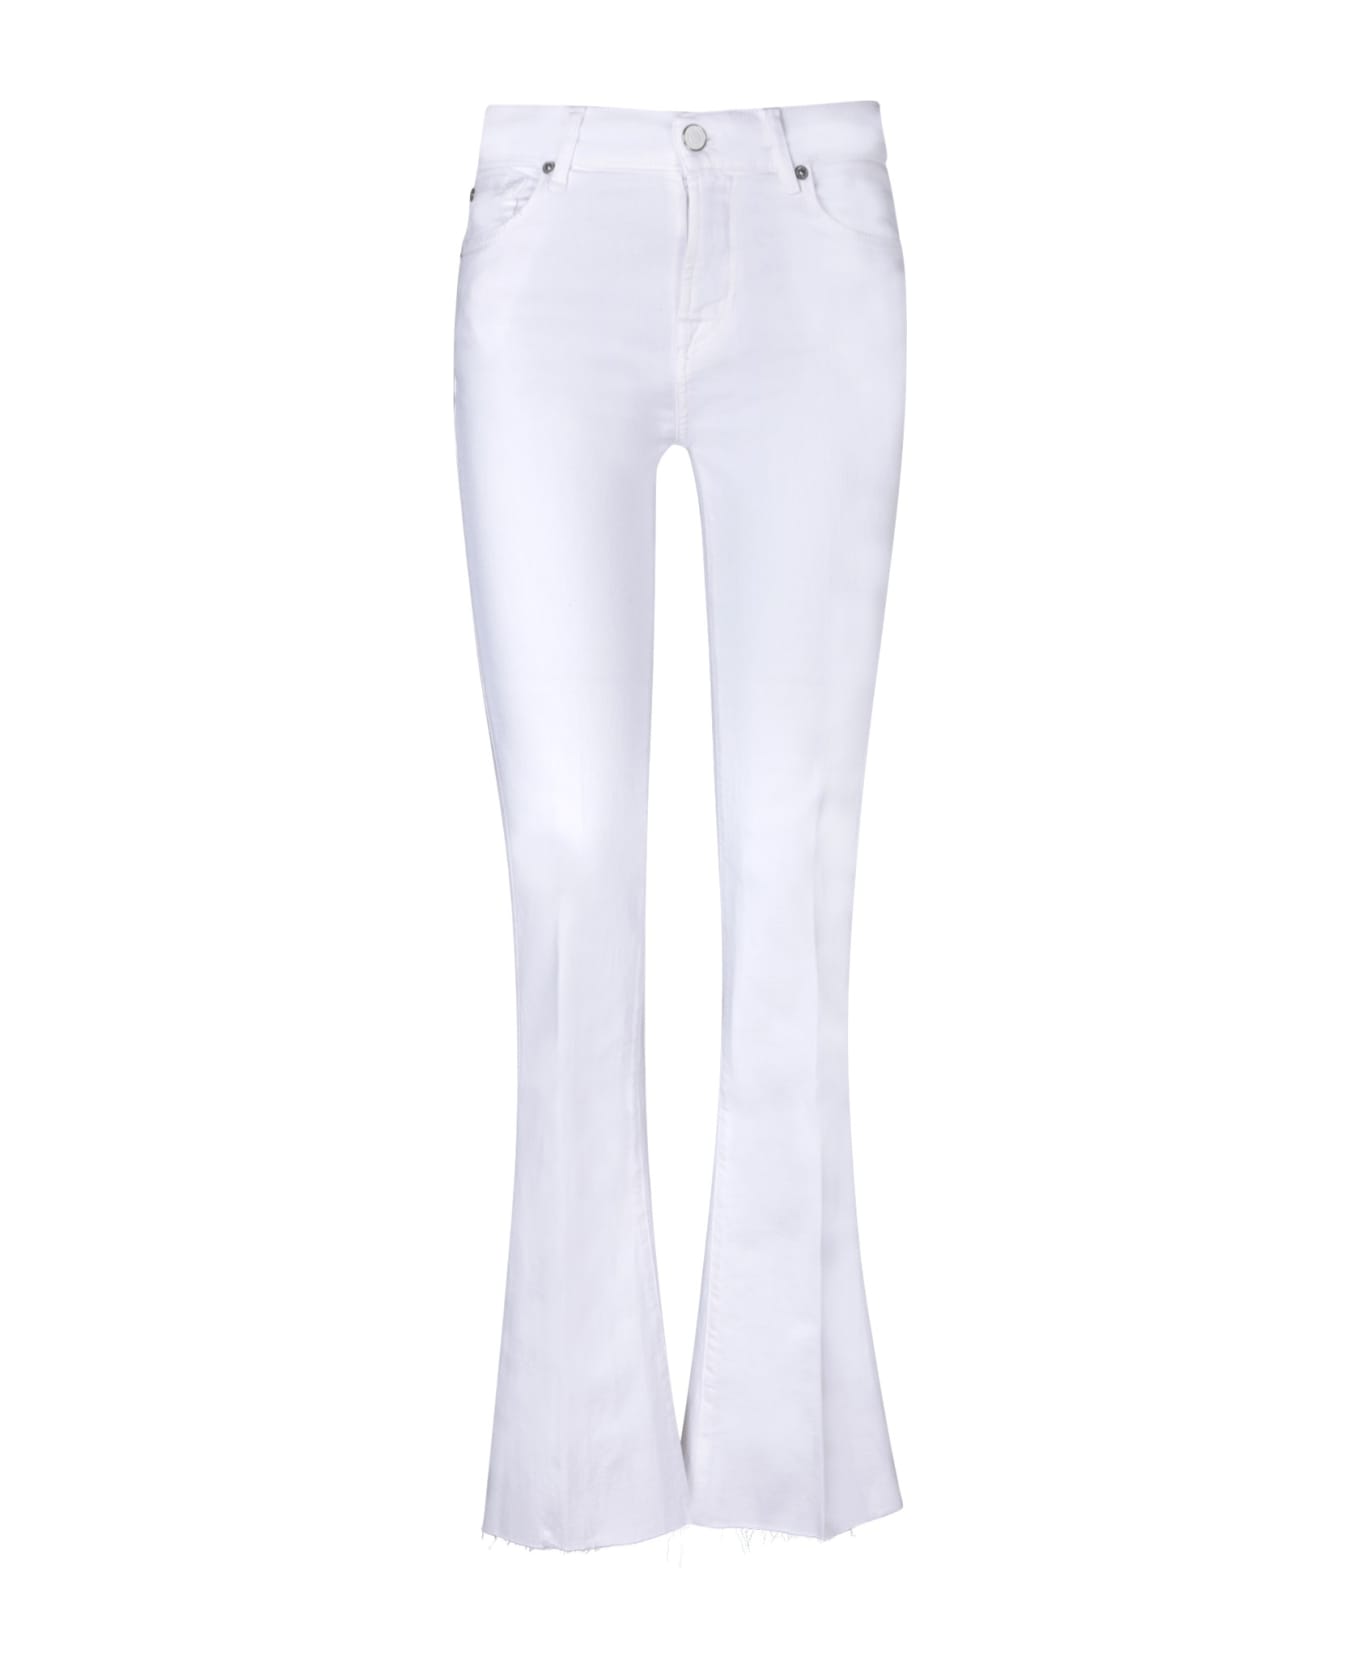 7 For All Mankind Bootcut White Jeans - White